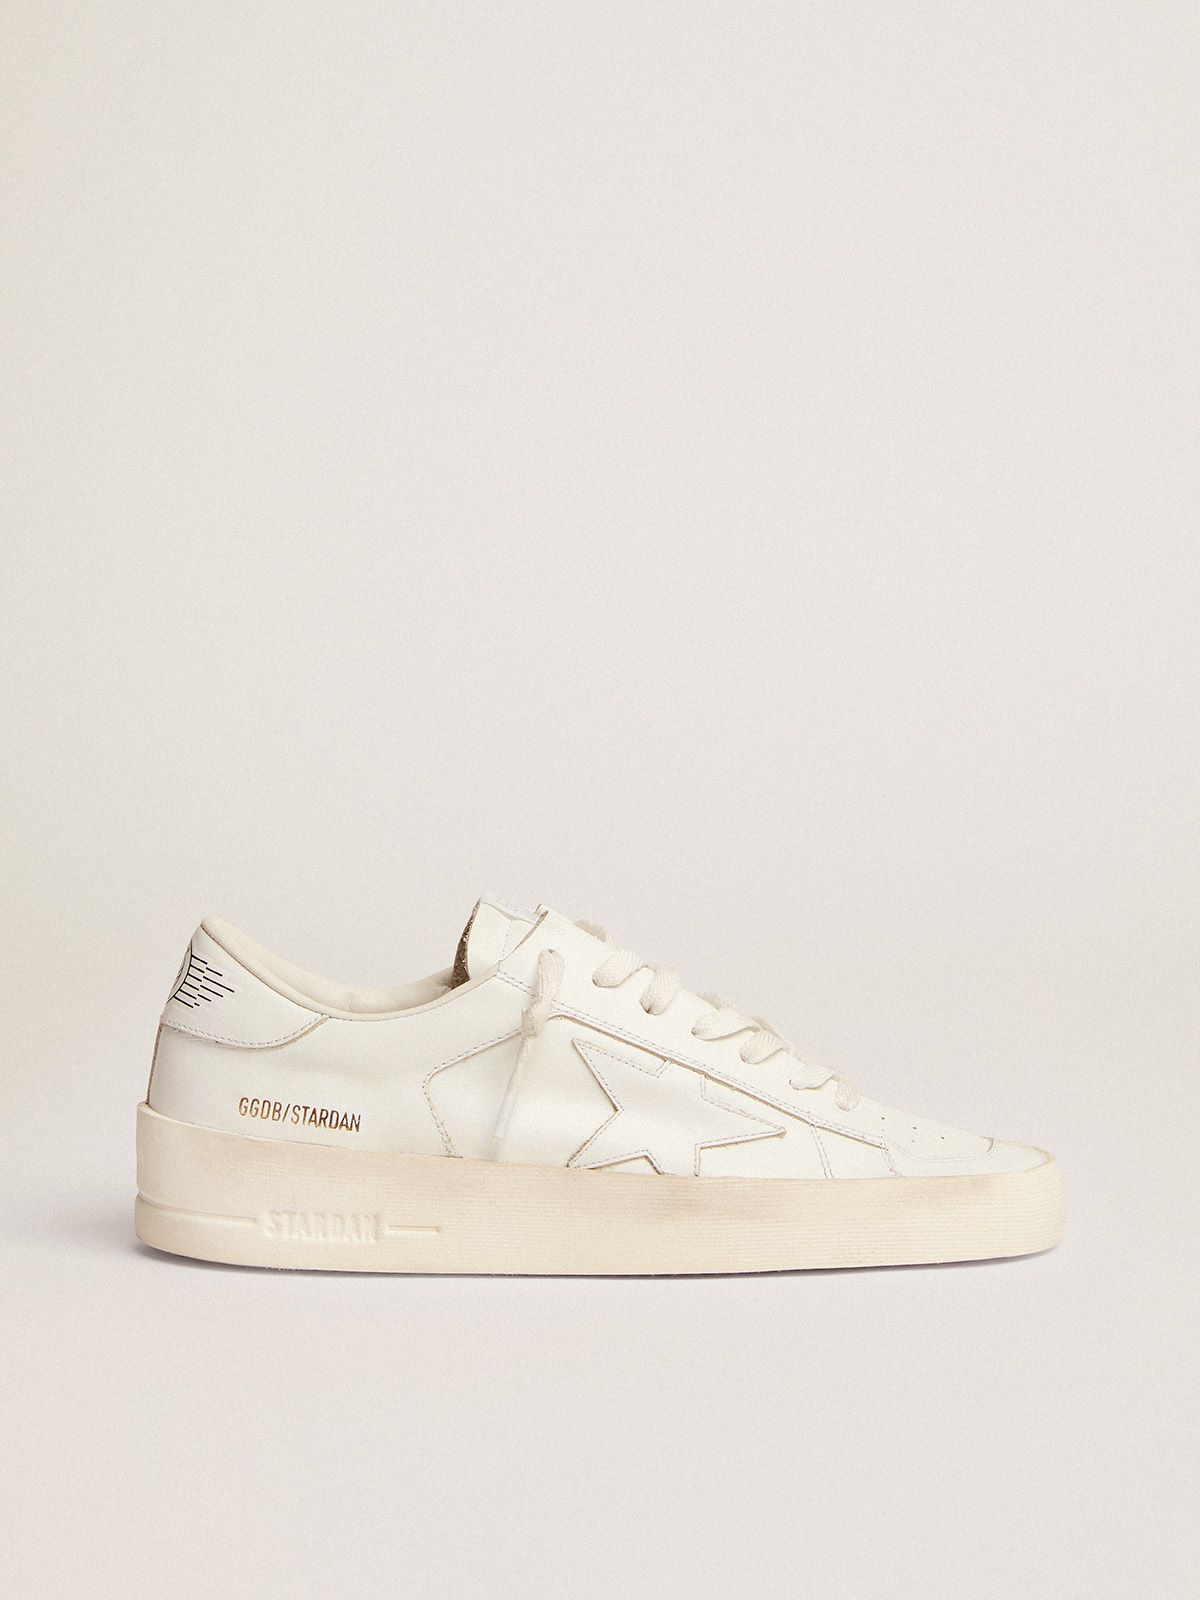 golden goose leather total white Stardan sneakers in